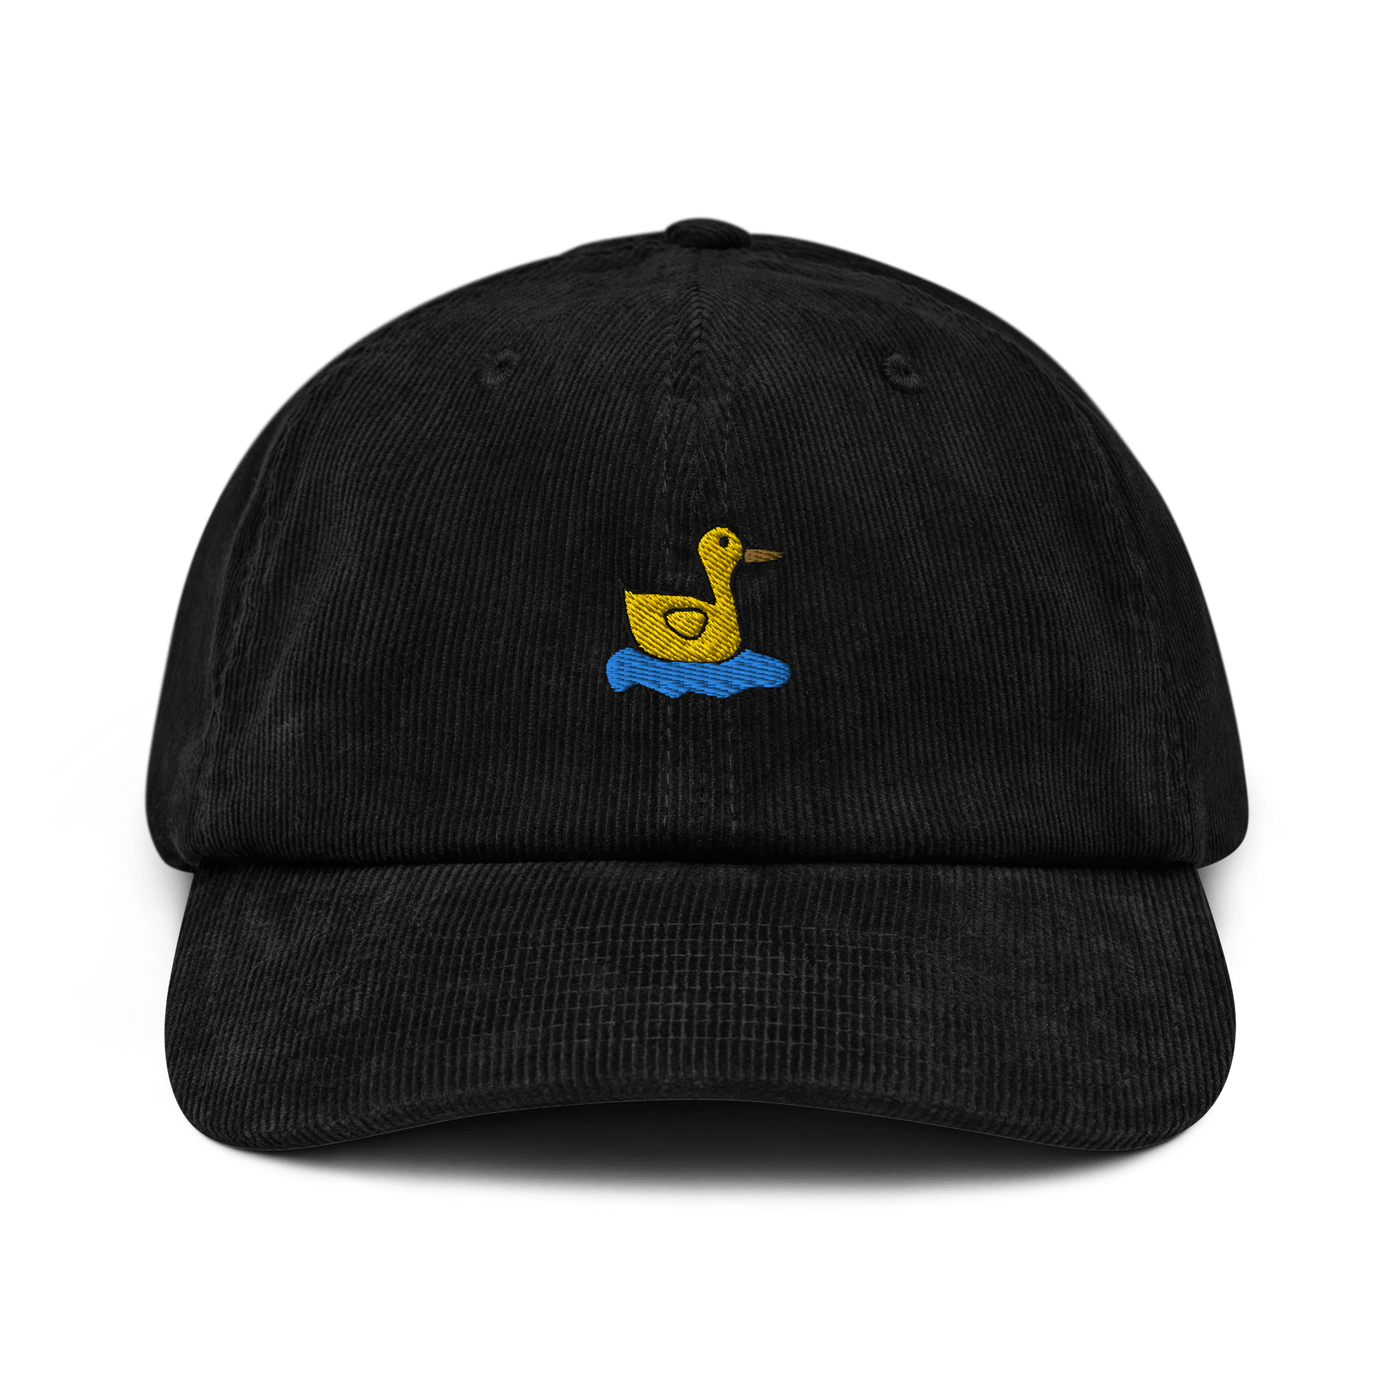 Lonely Duck Corduroy hat - Black - - Just Another Cap Store